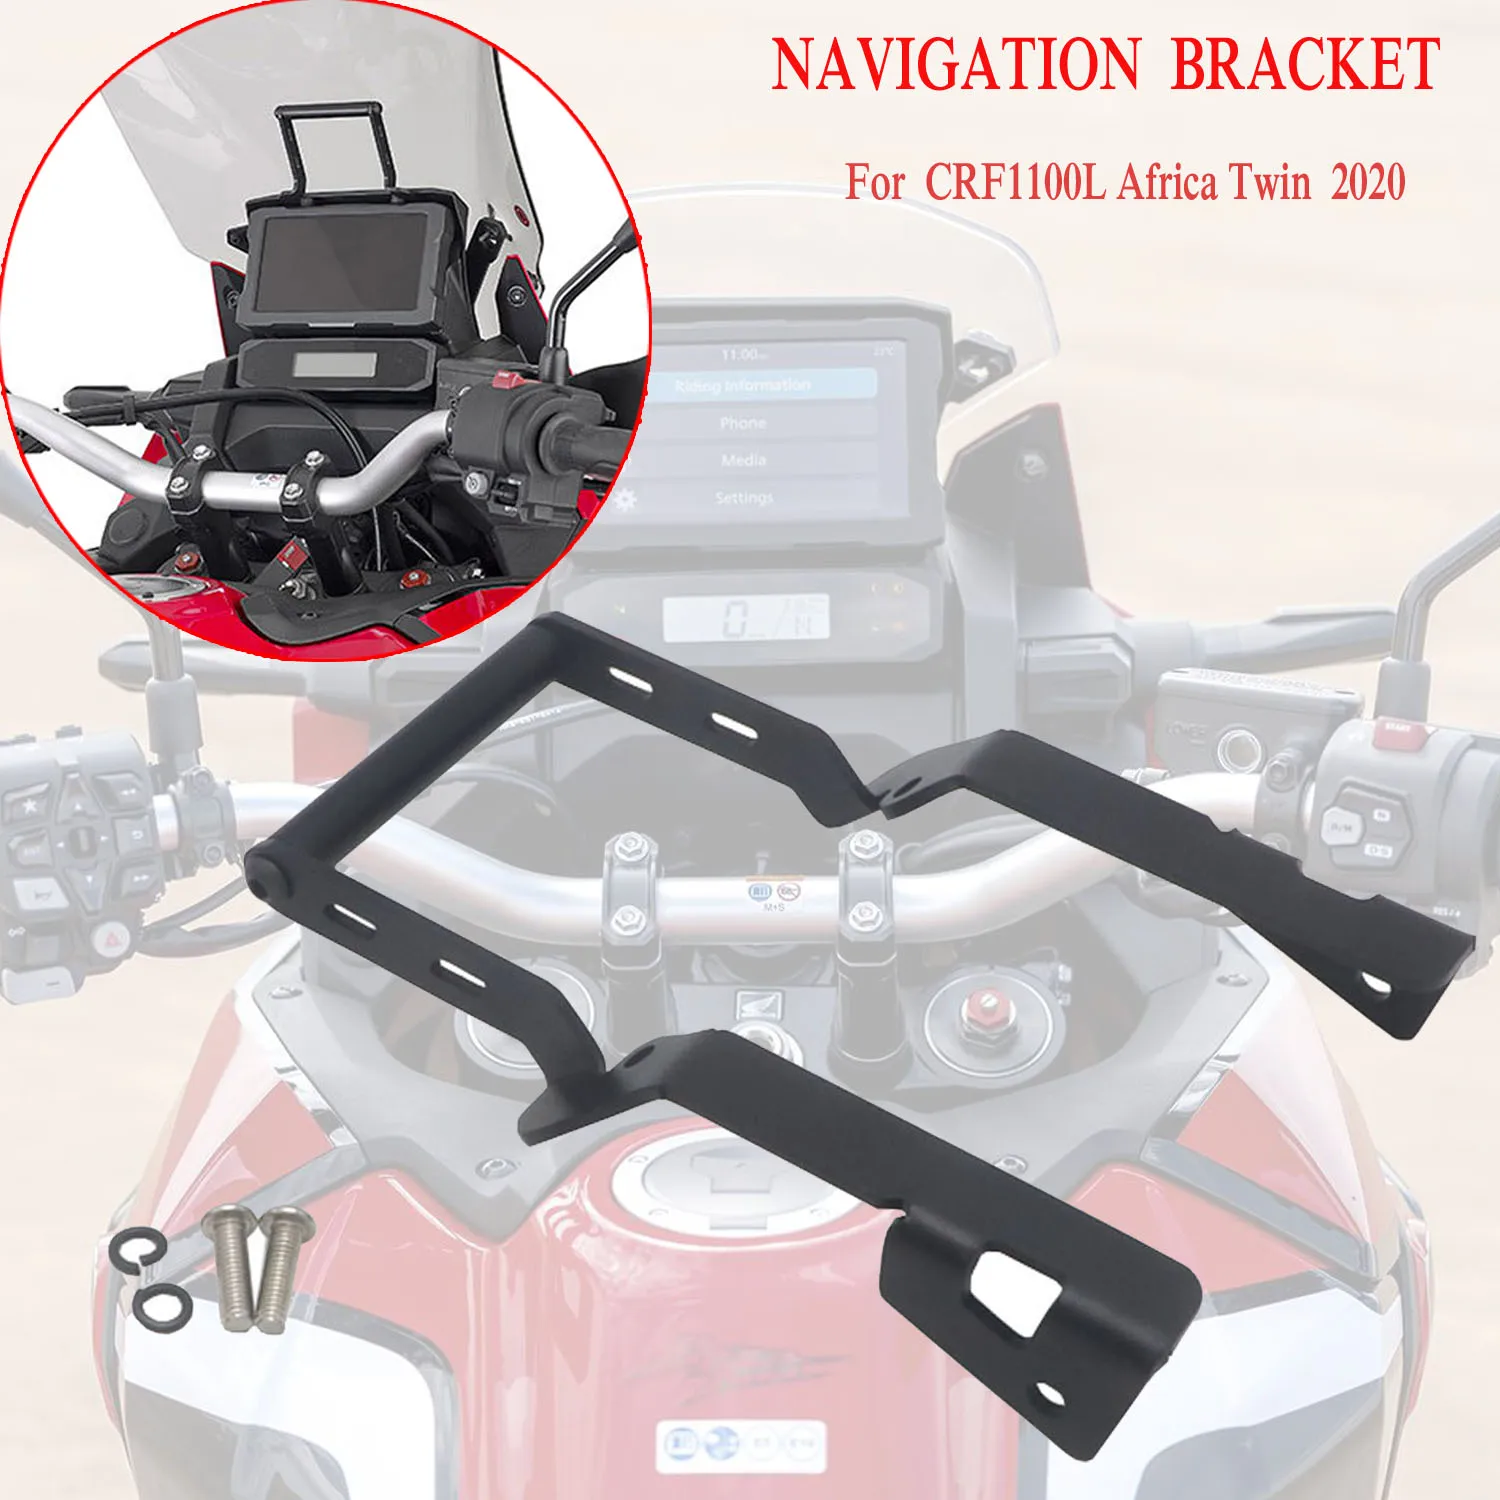 

NEW Motorcycle Accessories Stand Holder Phone GPS Navigaton Plate Bracket For HONDA CRF1100L Africa Twin CRF 1100 L 2020